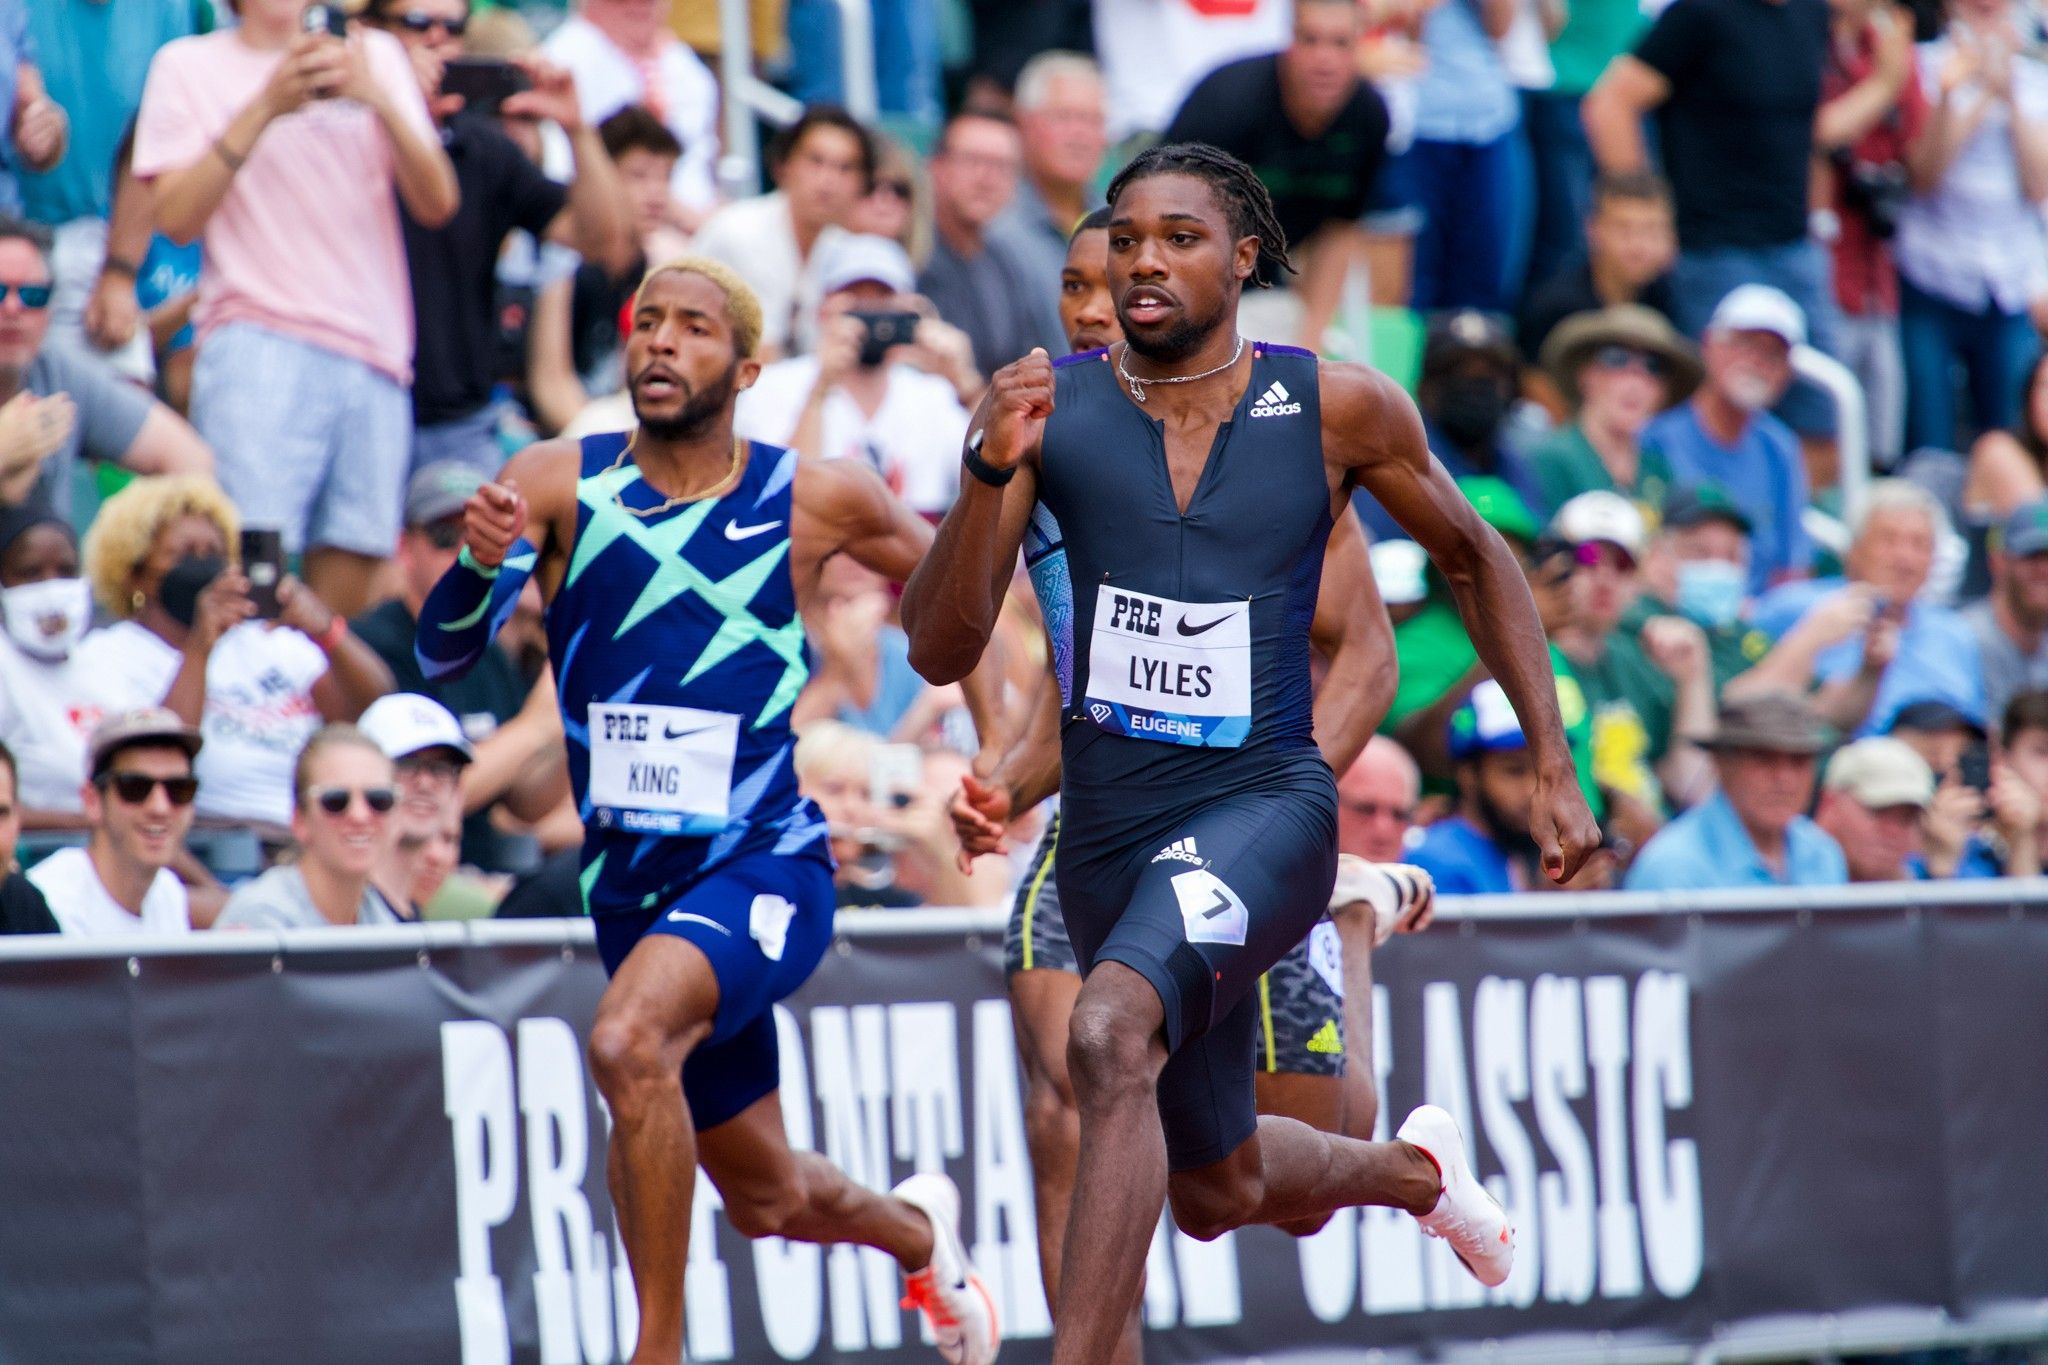 Noah Lyles on his way to a 19.52 200m at the Wanda Diamond League meeting in Eugene